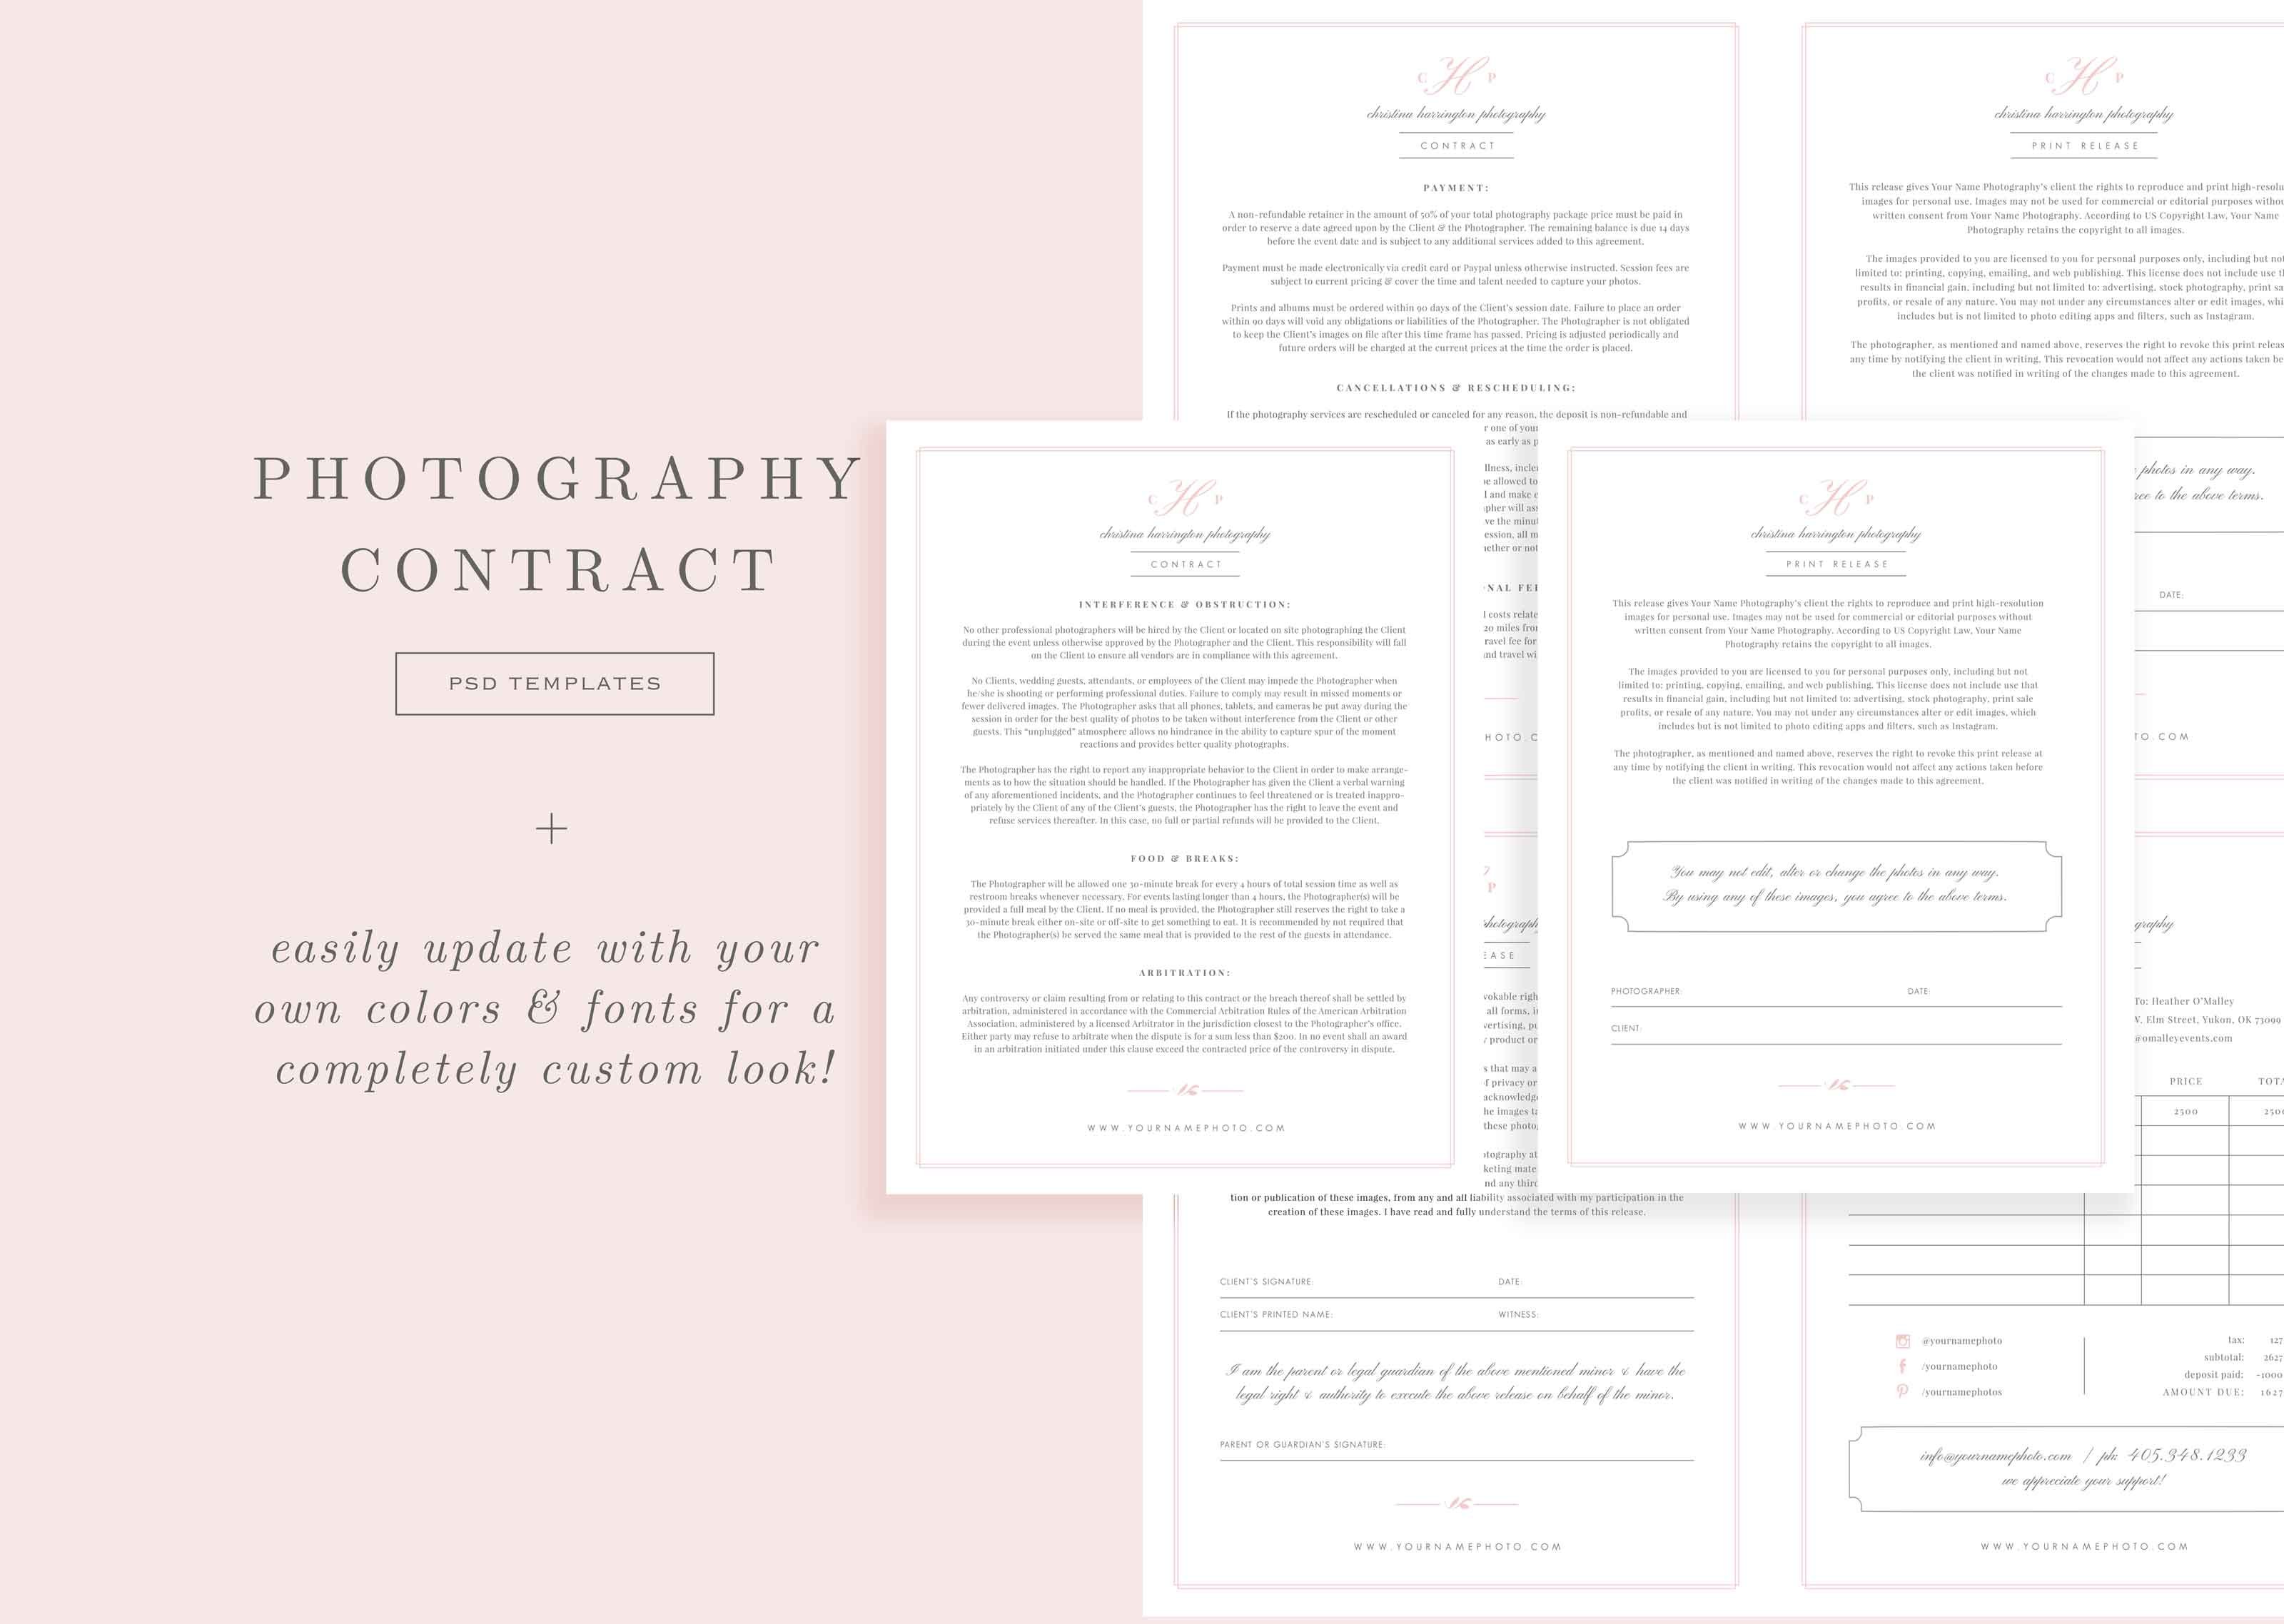 Wedding Photographer Contract Form cover image.